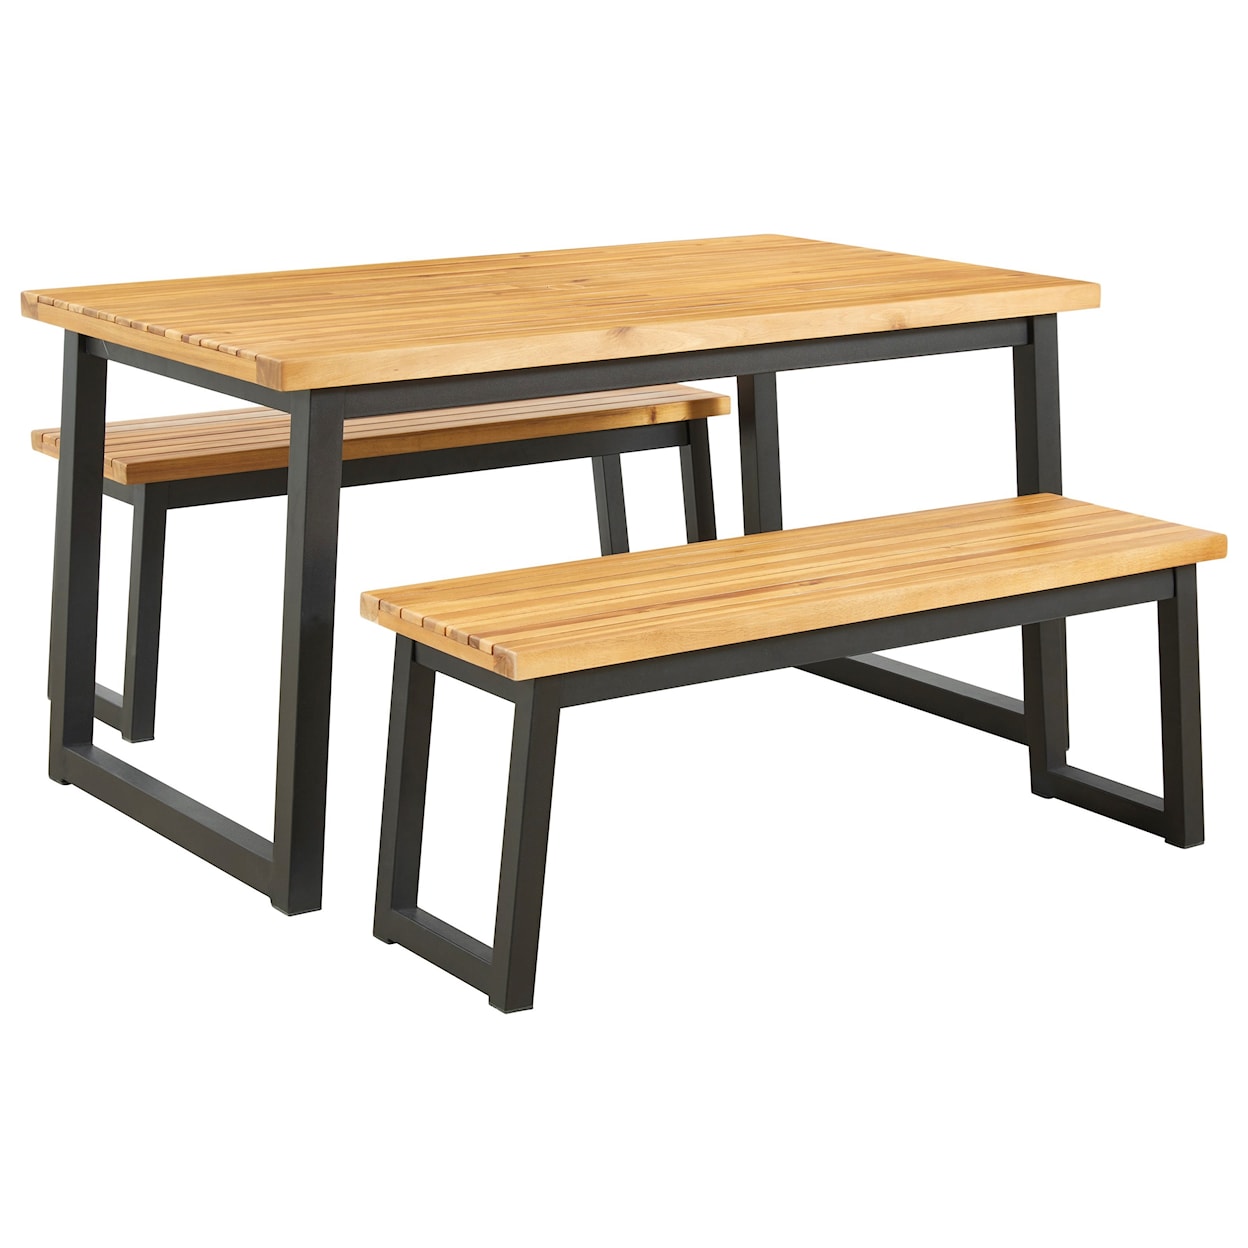 Signature Design Town Wood Dining Table Set